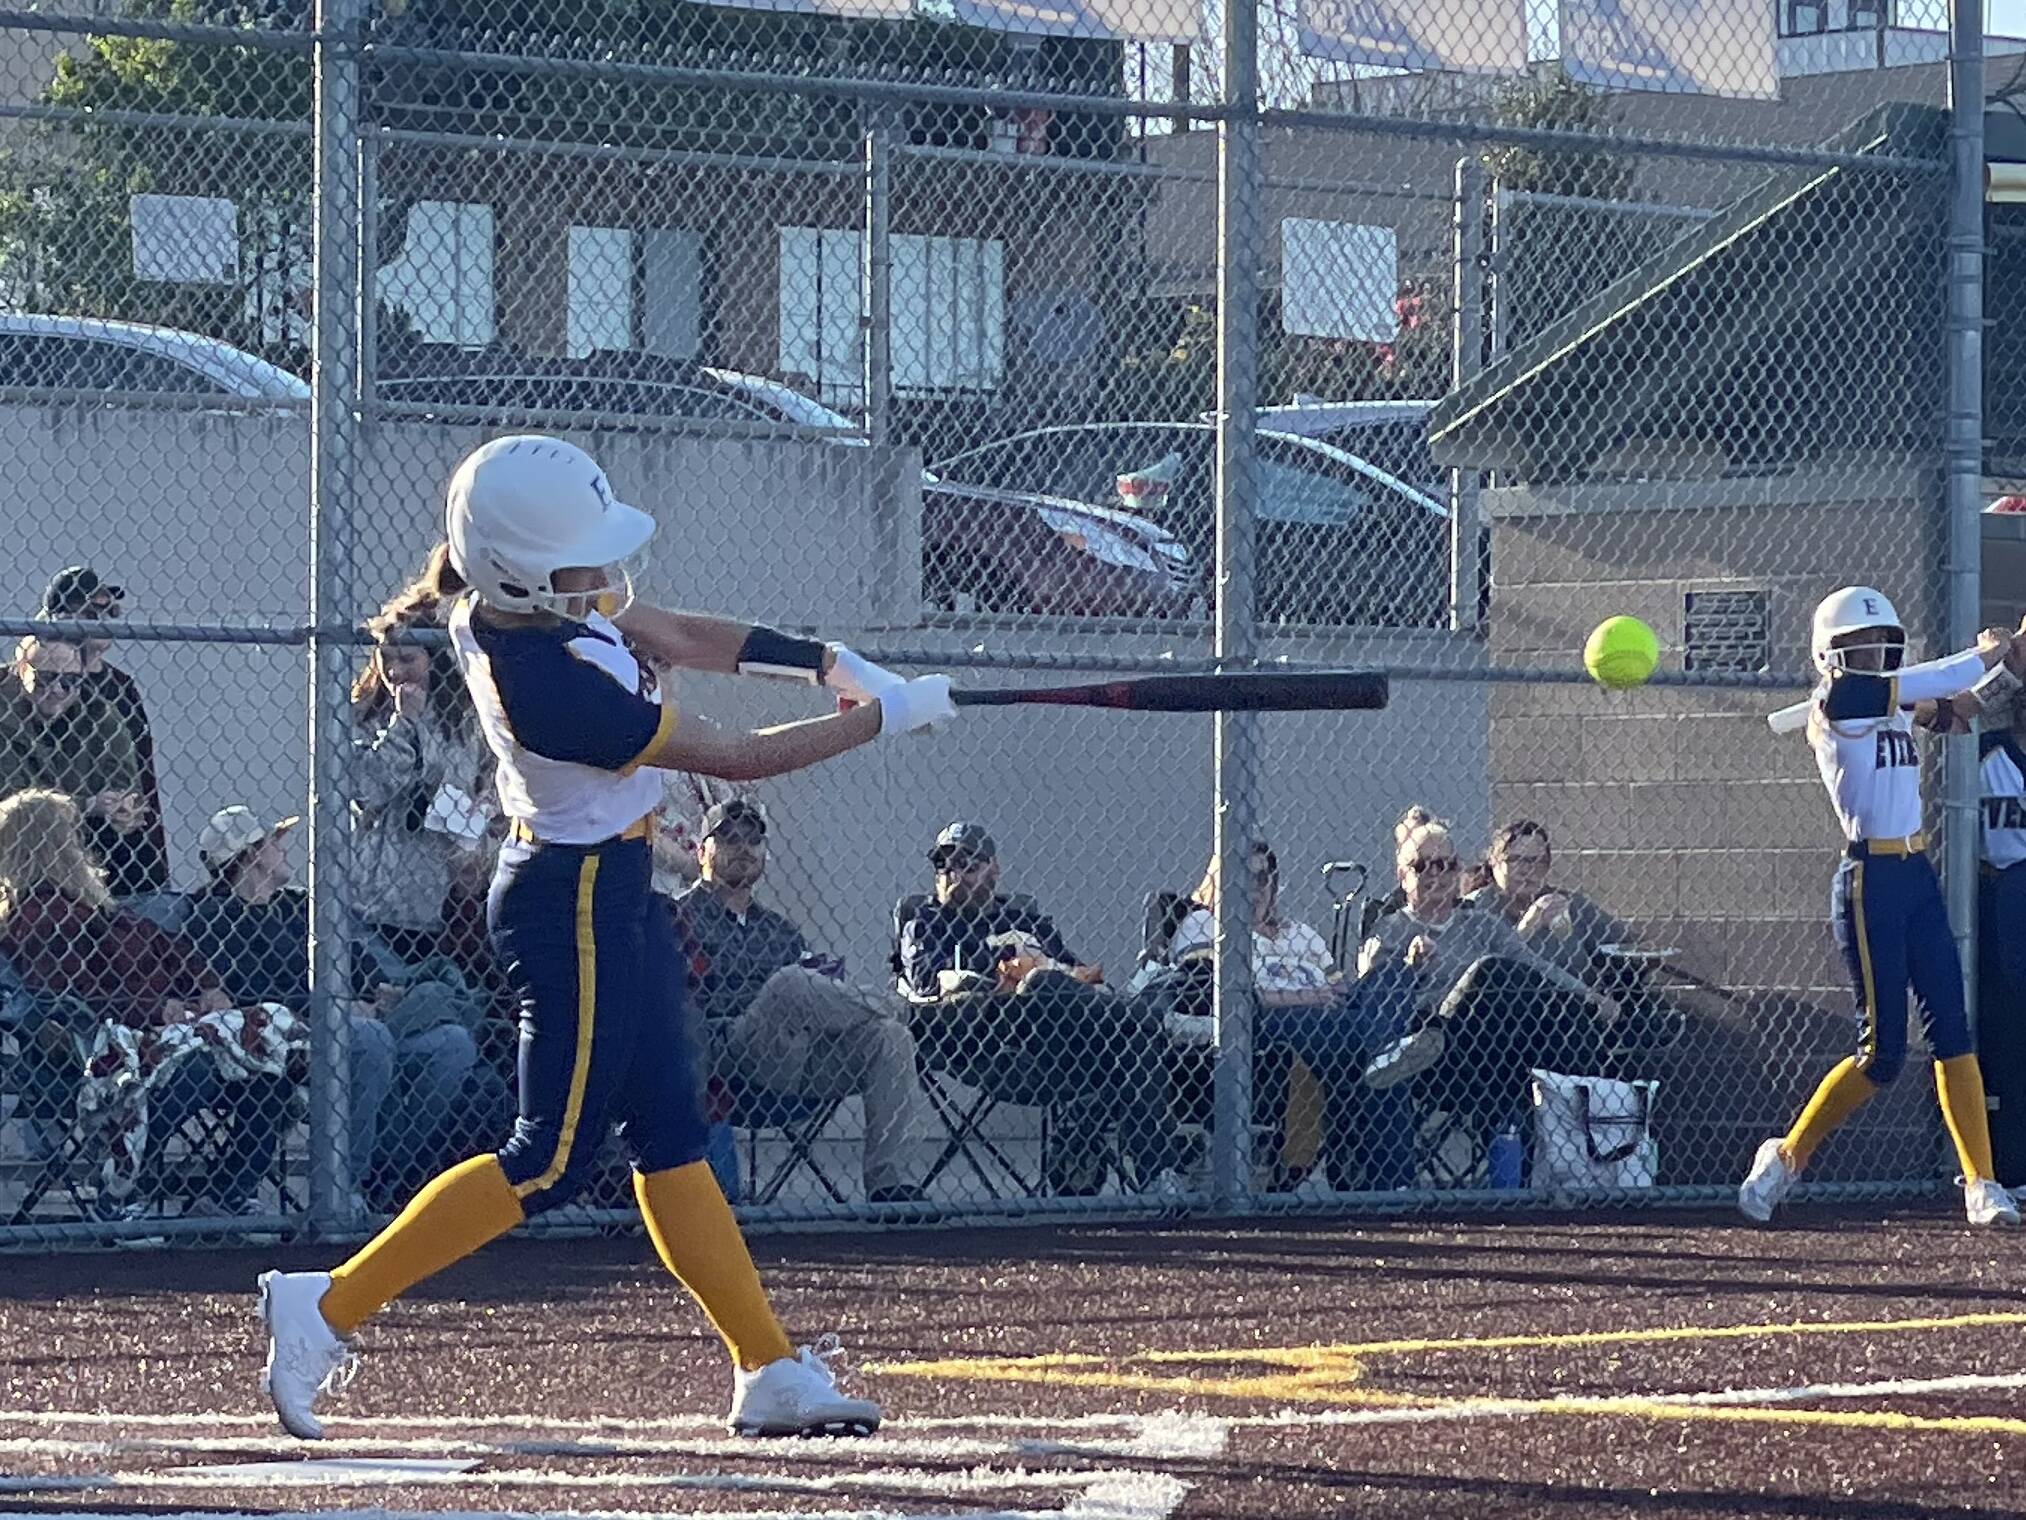 Everett freshman Anna Luscher hits a two-run single in the first inning of the Seagulls’ 13-7 victory over the Cascade Bruins on Friday at Lincoln Field. (Aaron Coe / The Herald)